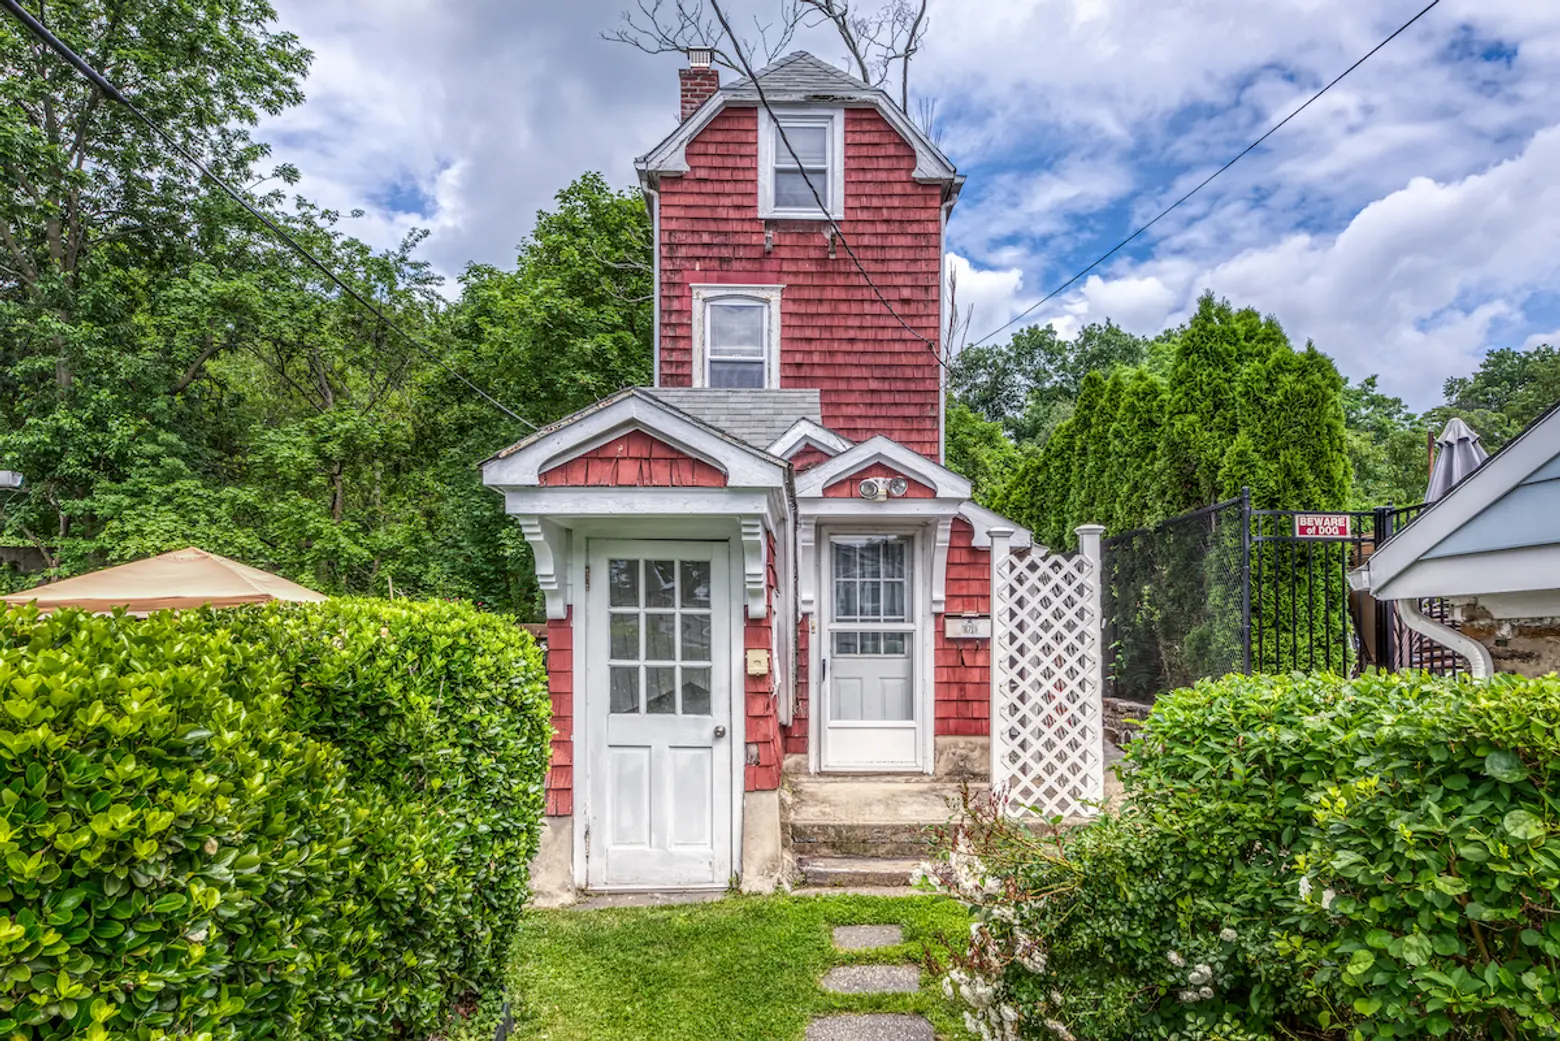 Storied Westchester Skinny House seeks a buyer with a big heart and $275K